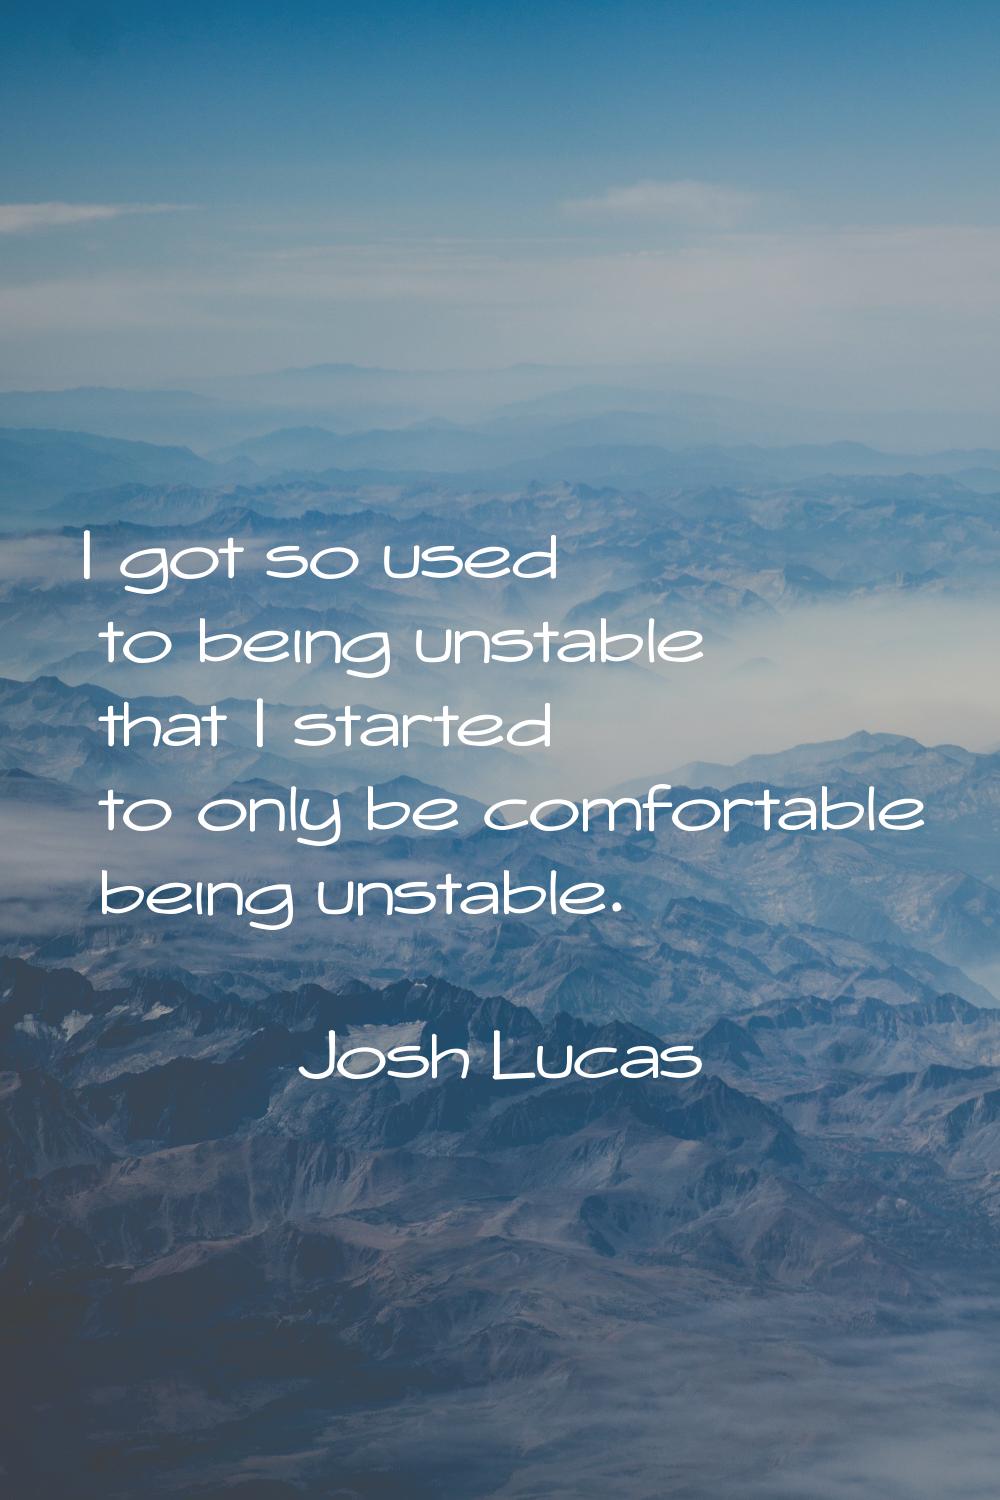 I got so used to being unstable that I started to only be comfortable being unstable.